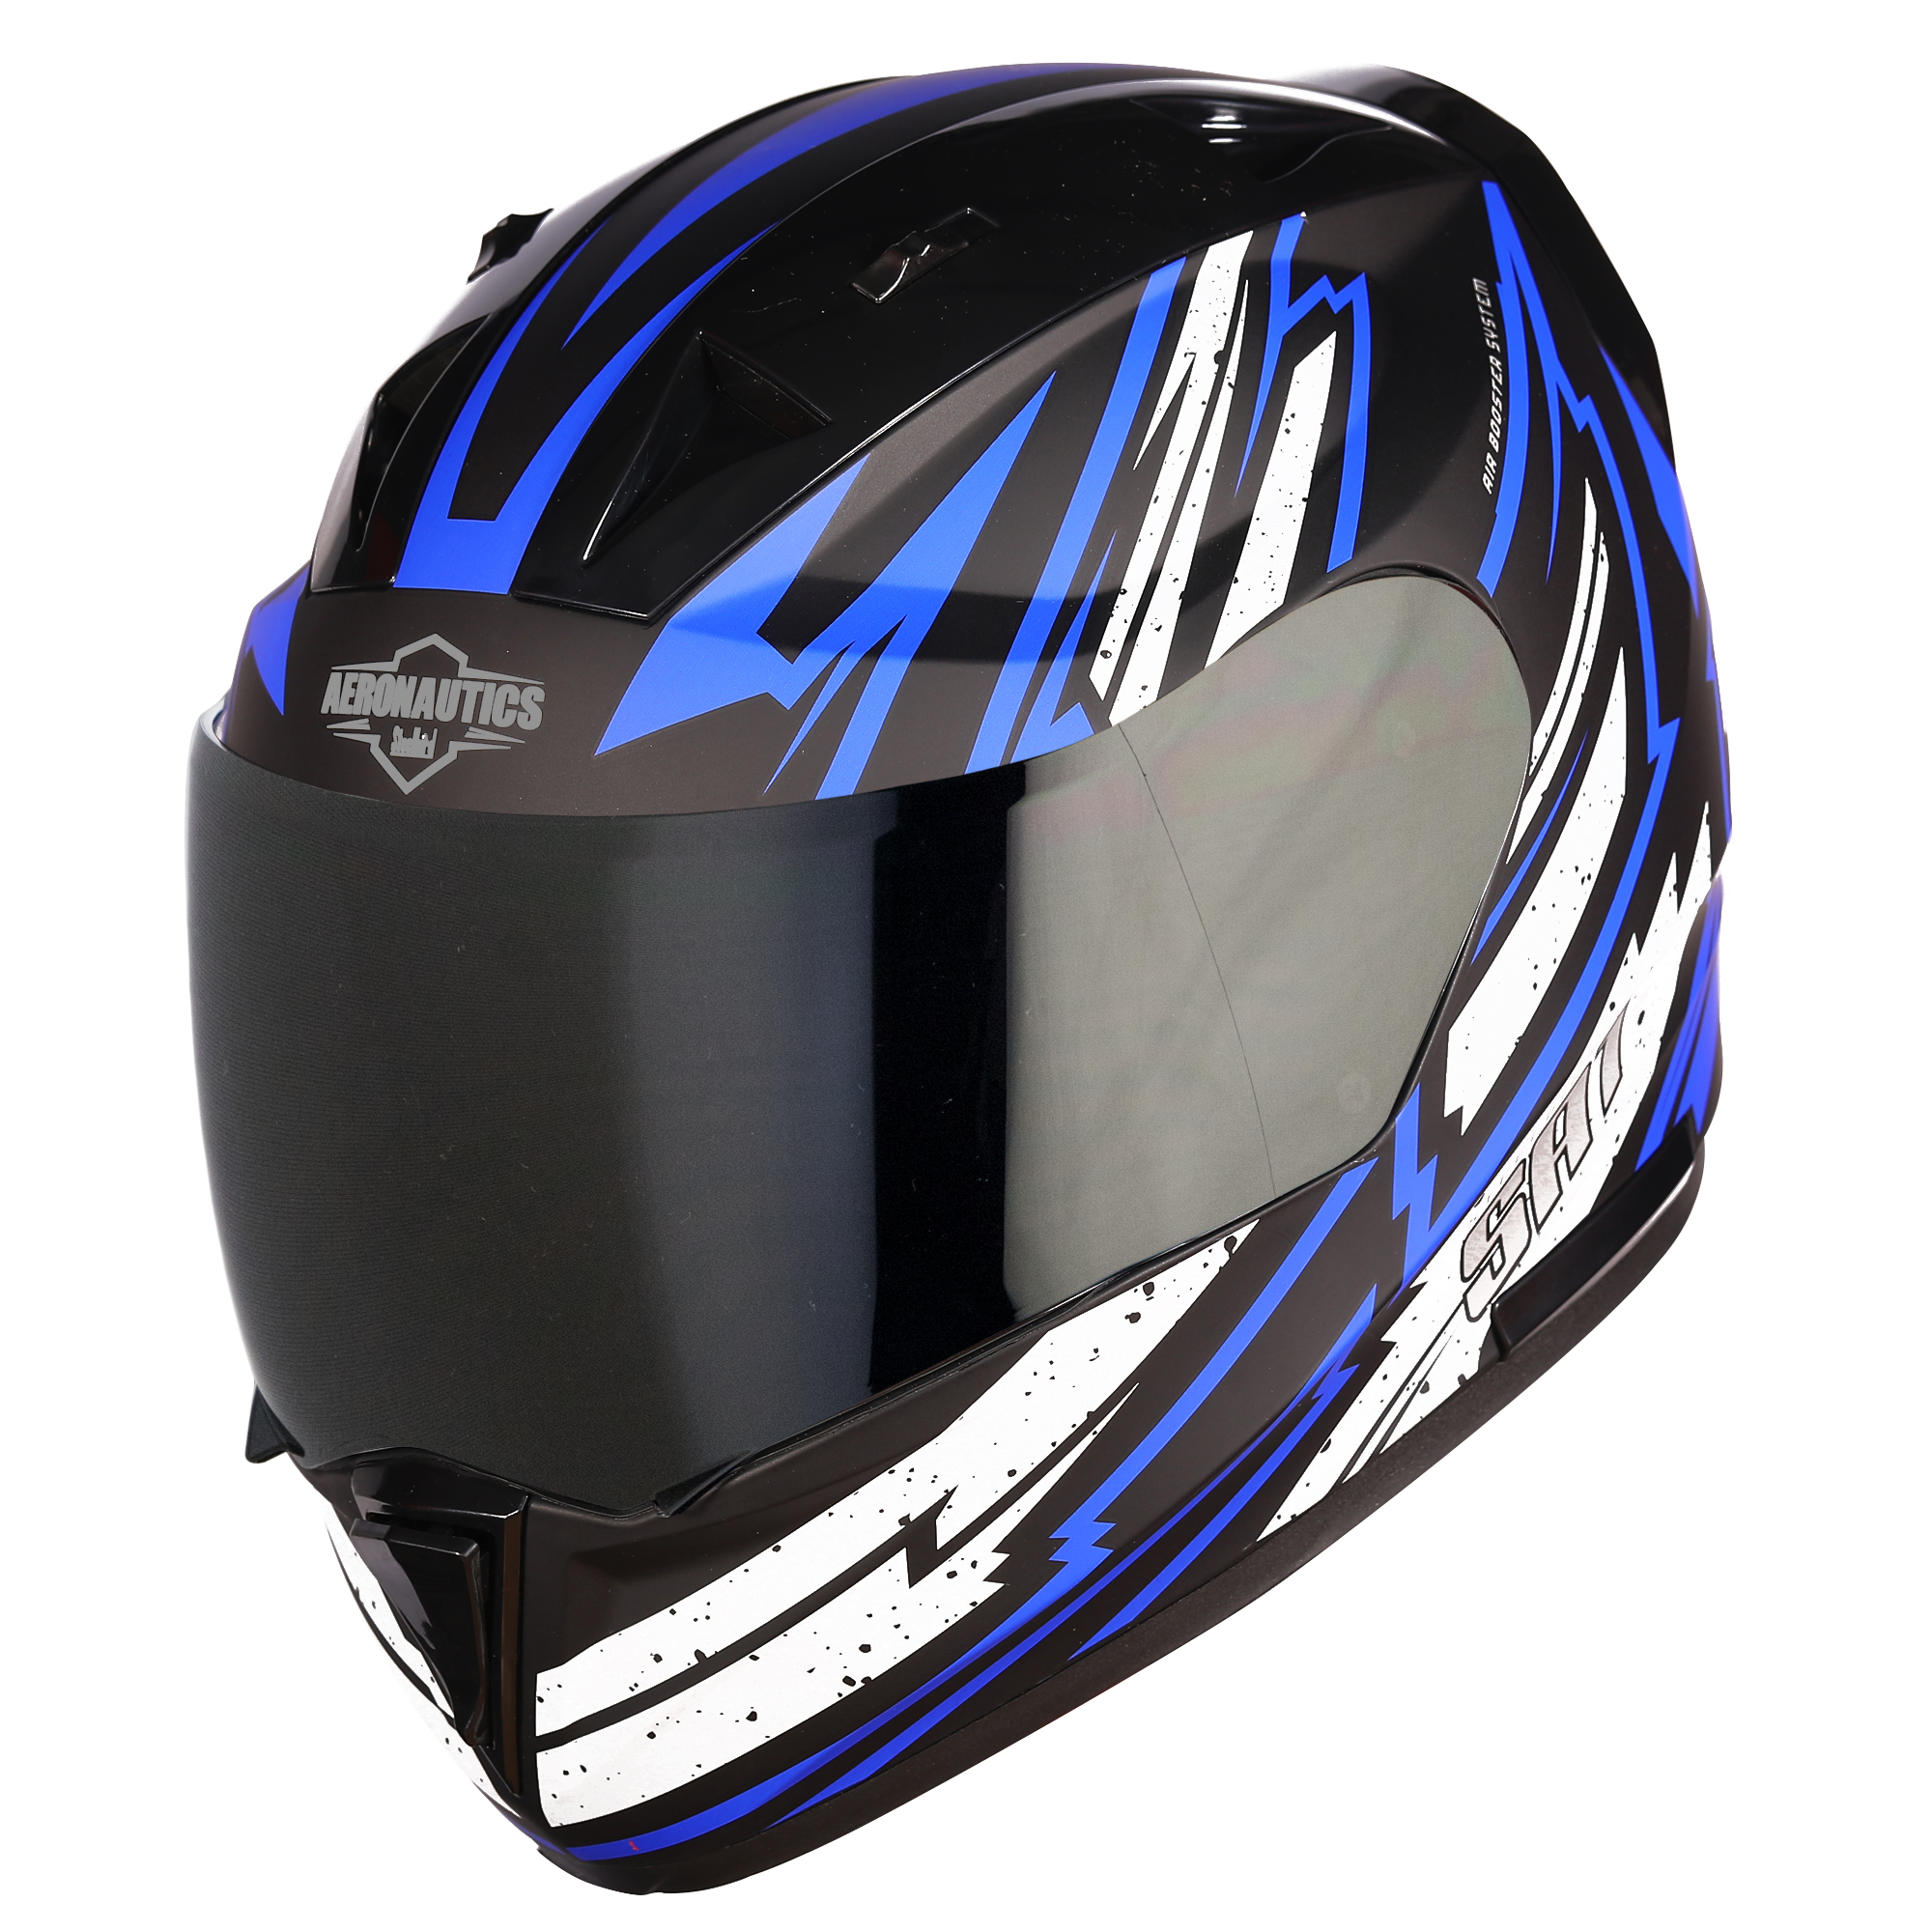 SA-1 BOOSTER MAT BLACK WITH BLUE - SMOKE VISOR (WITH EXTRA CLEAR VISOR)